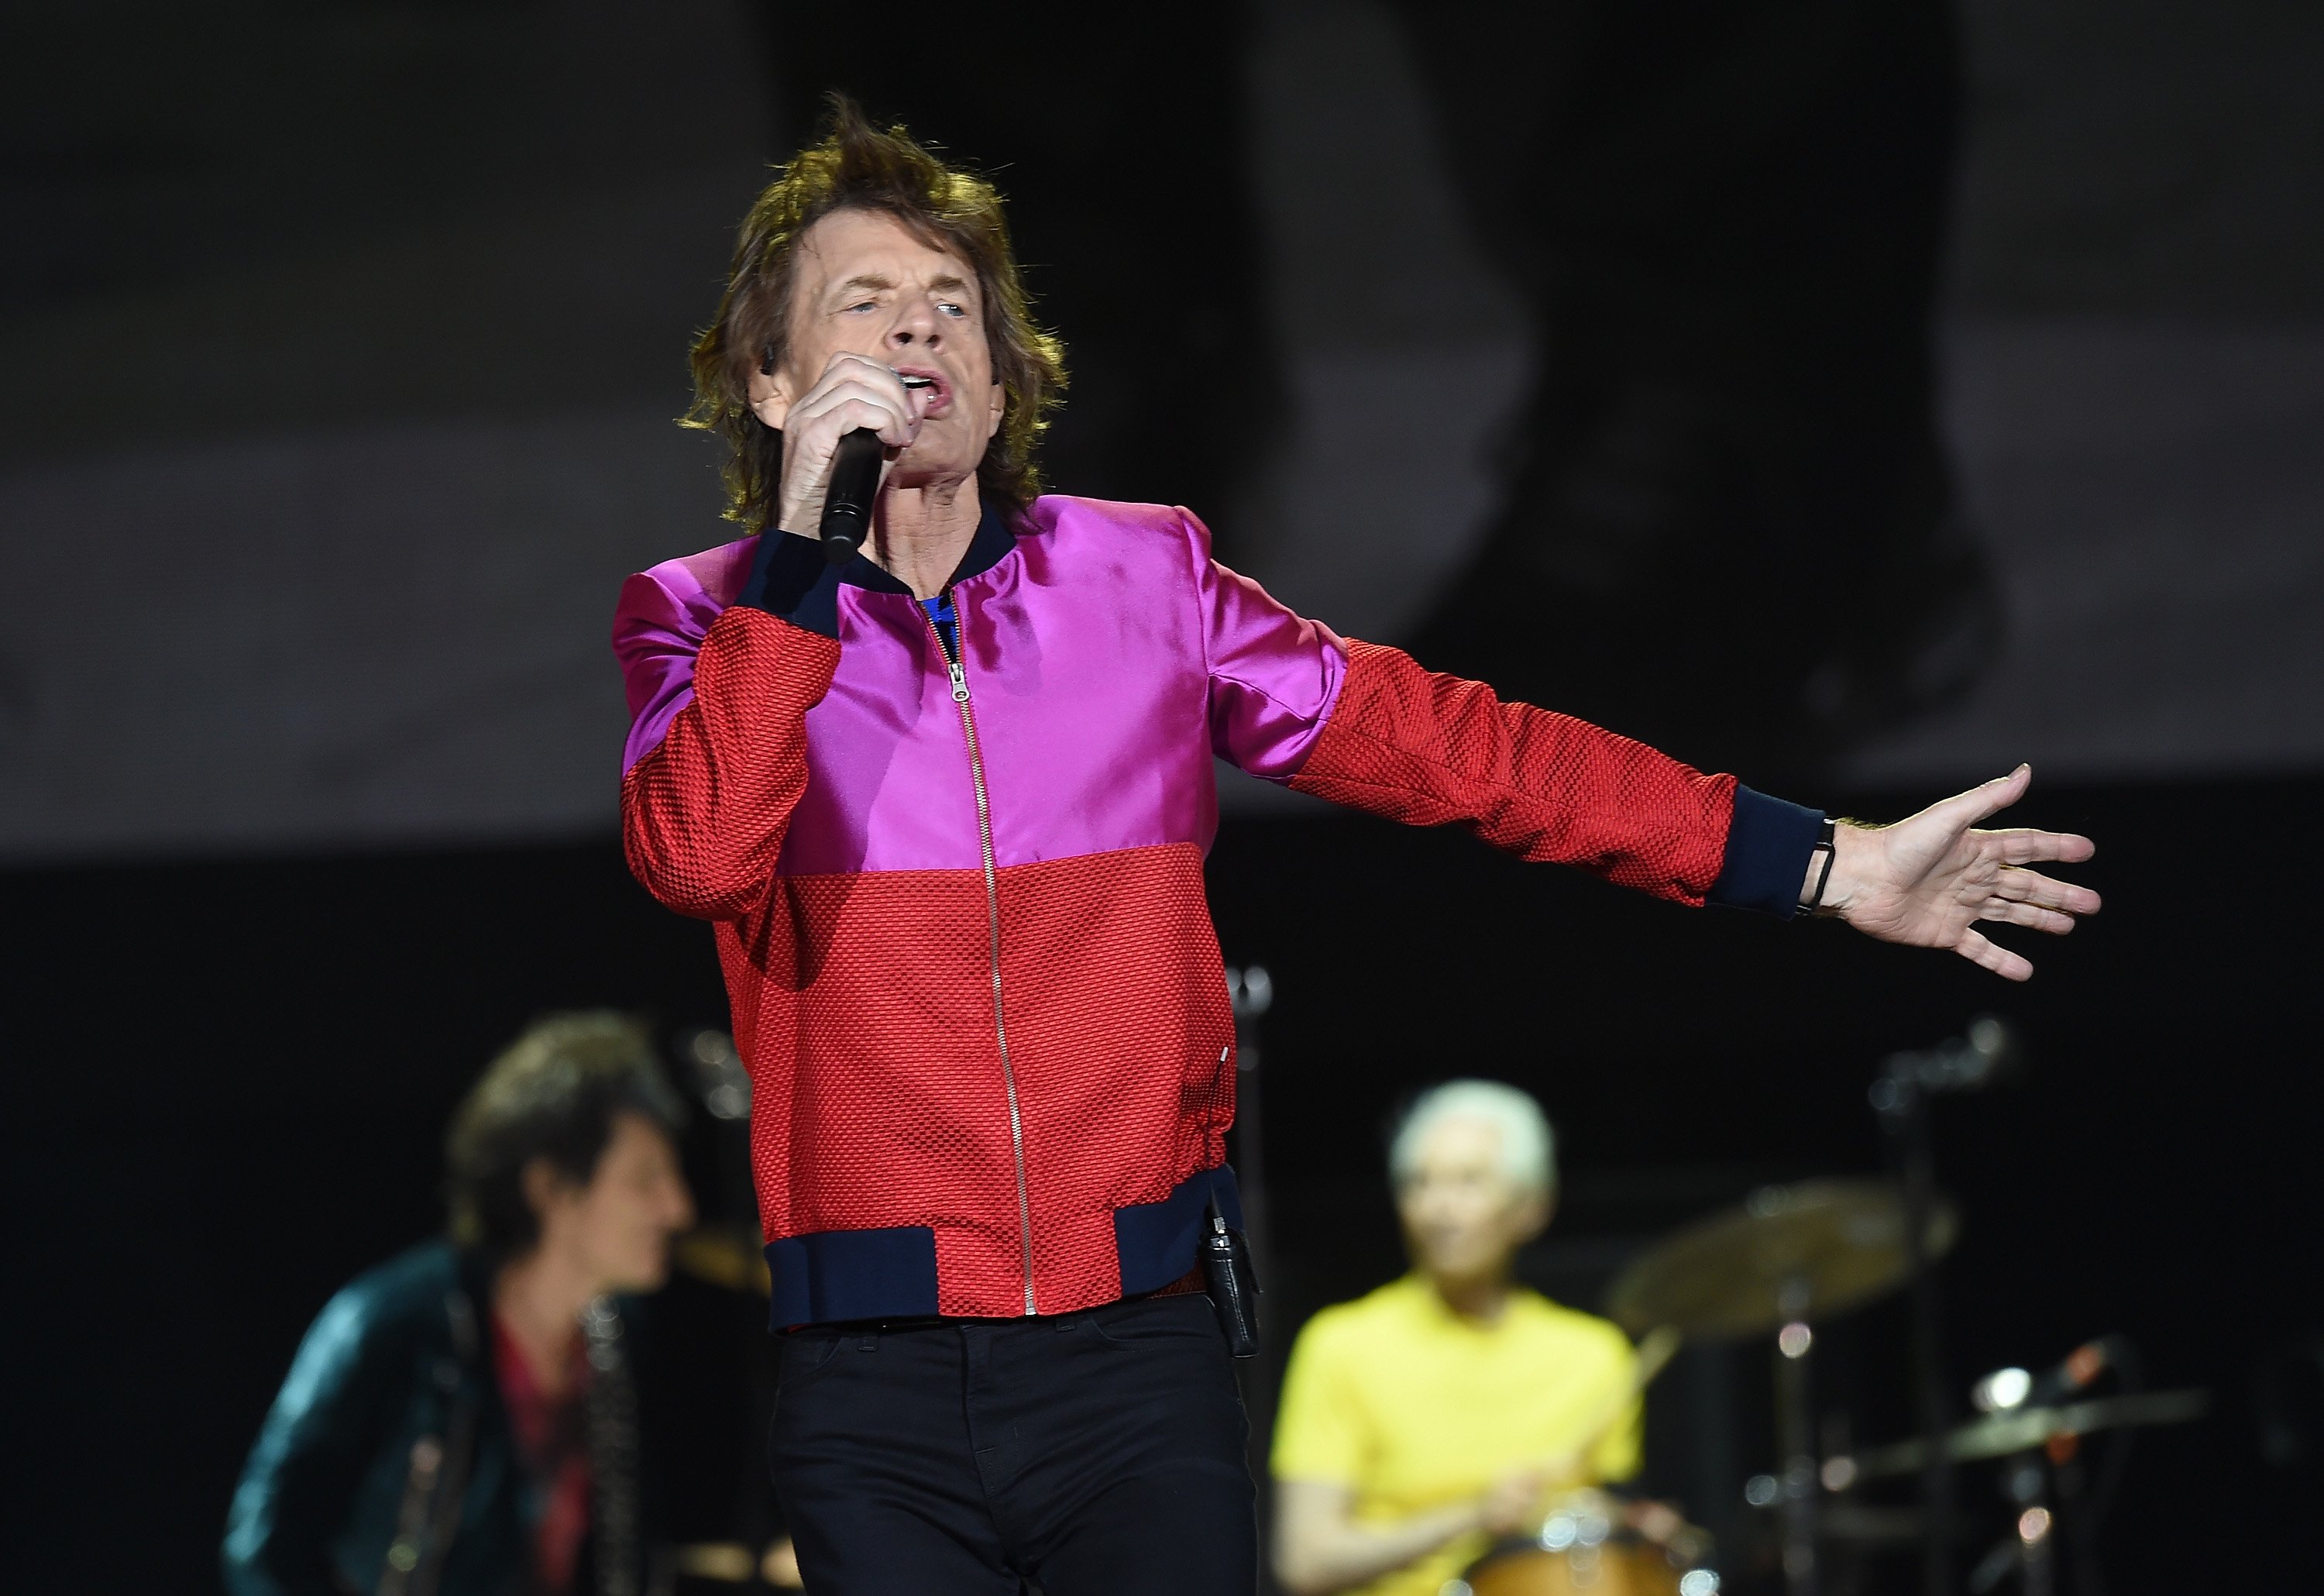 Mick Jagger of The Rolling Stones performs onstage during Desert Trip at the Empire Polo Field on October 14, 2016 in Indio, Calif.